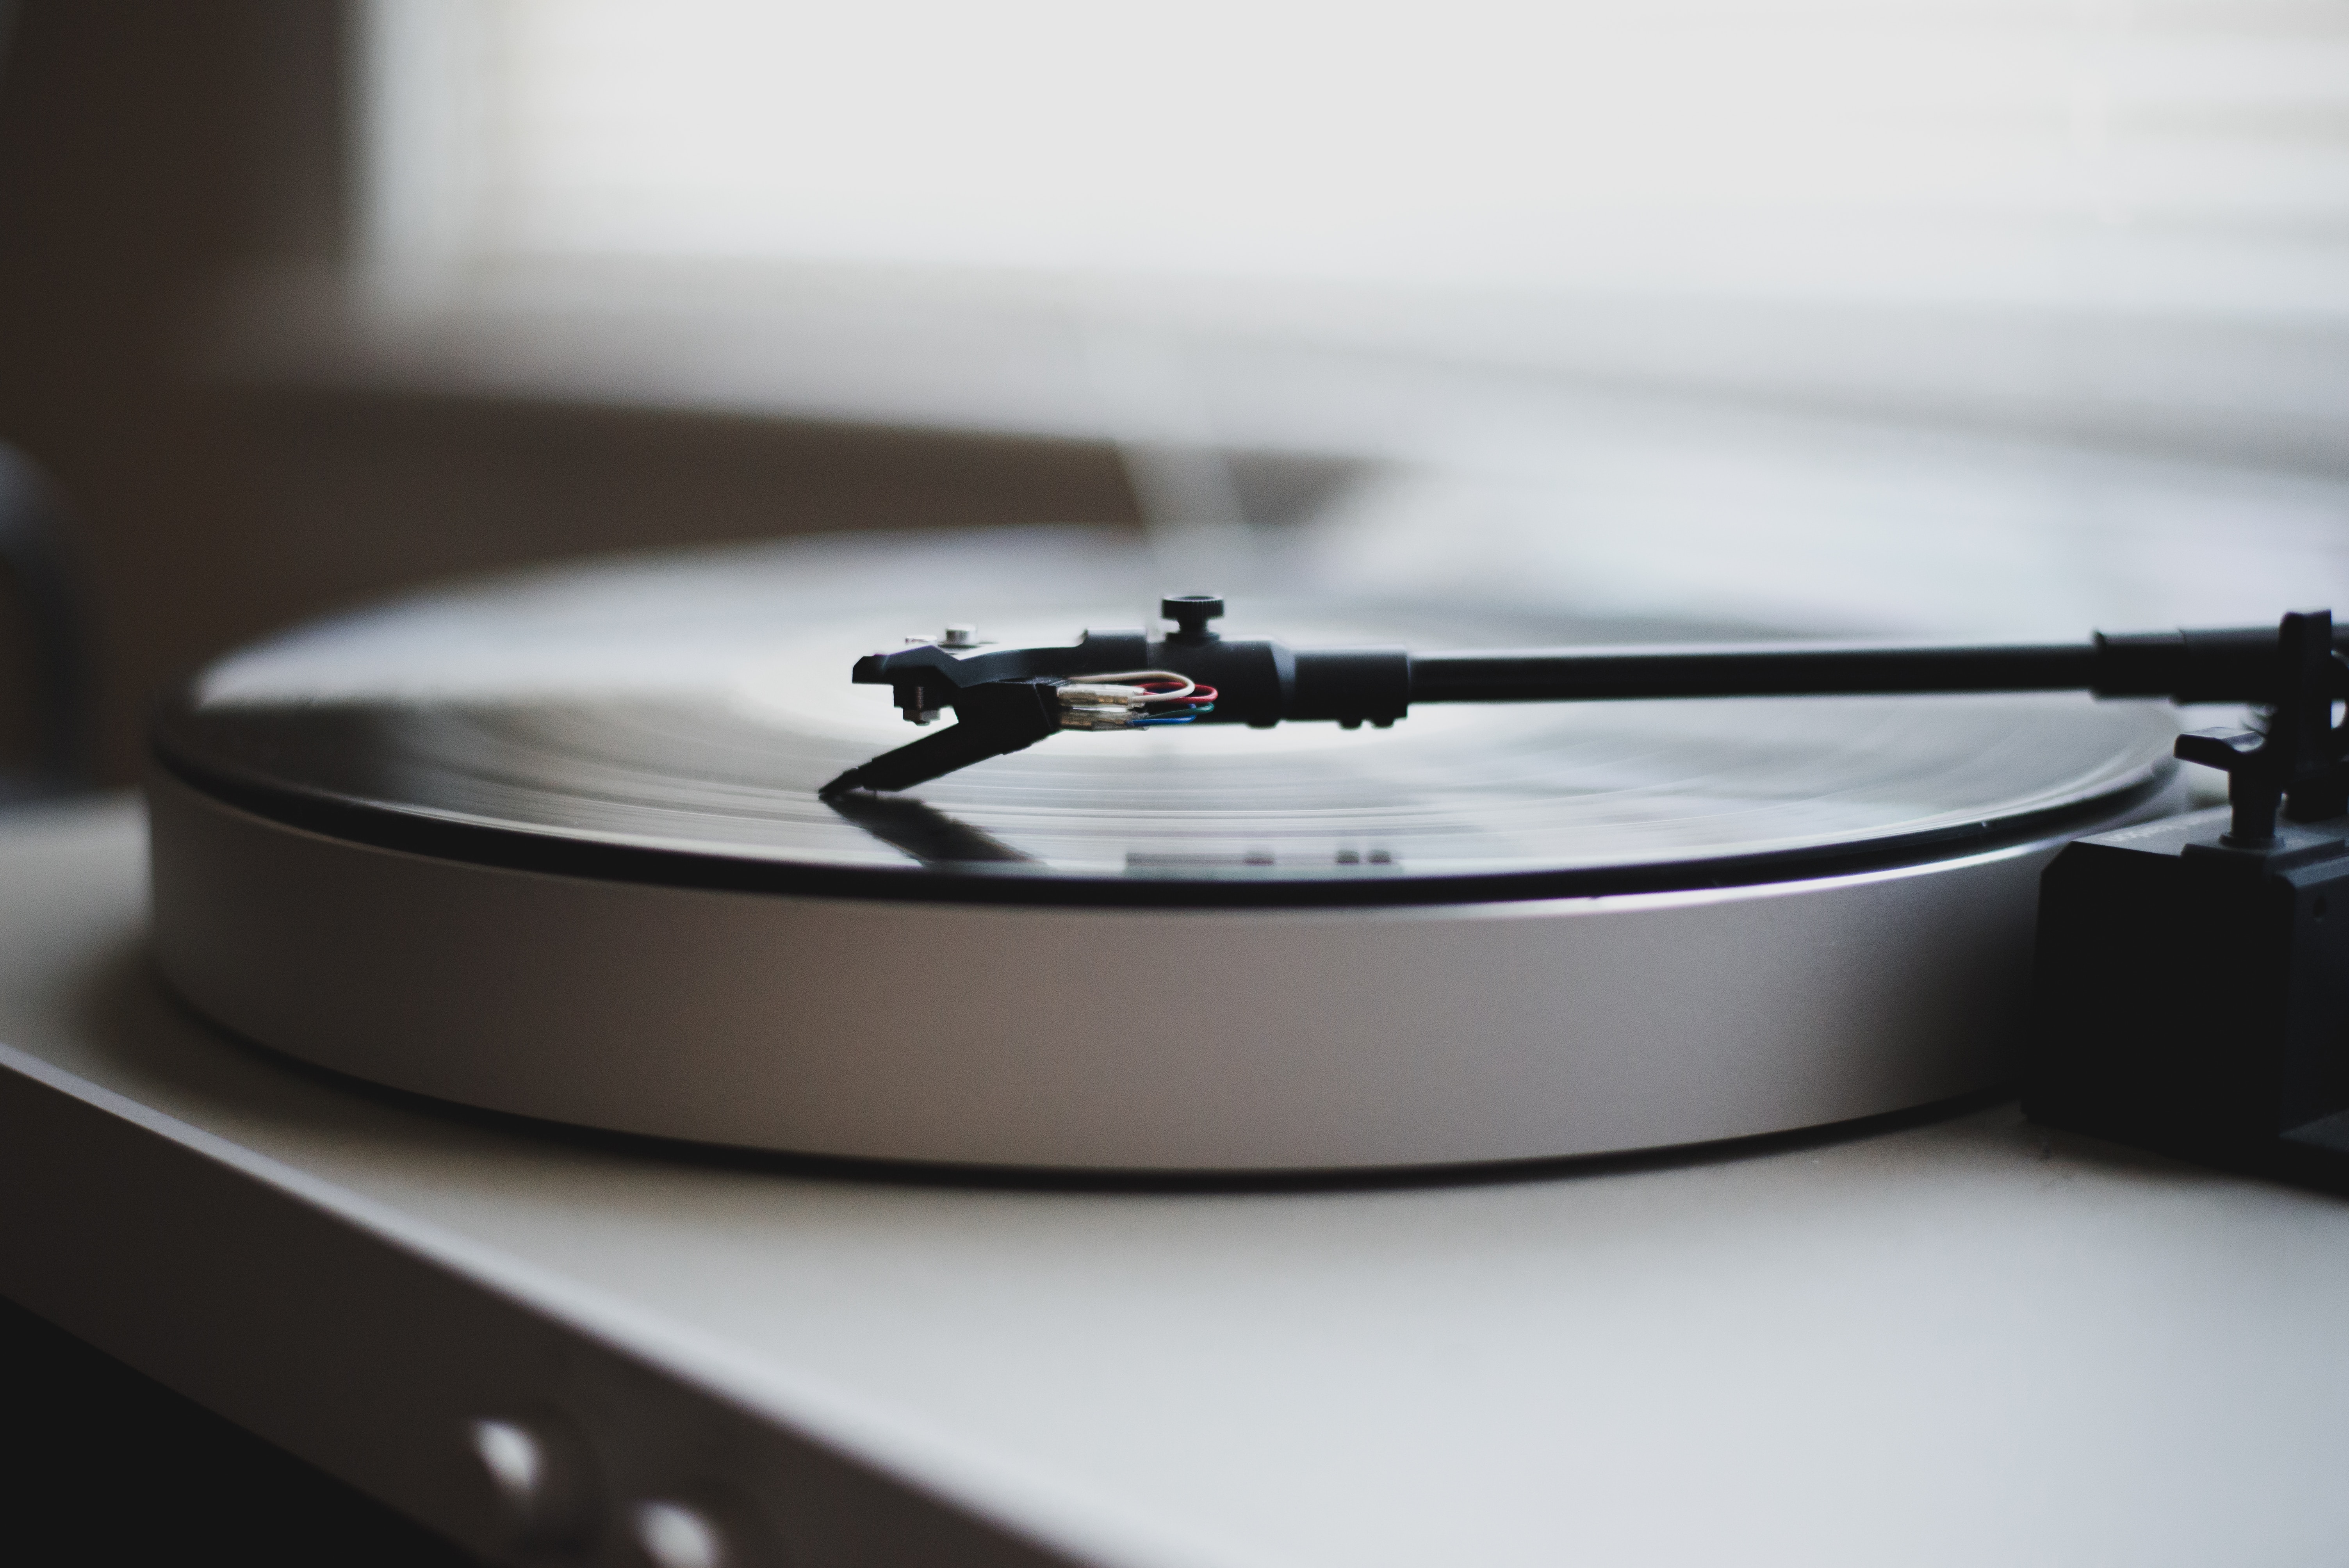 Ikea’s New Record Player Looks Better Than Expected